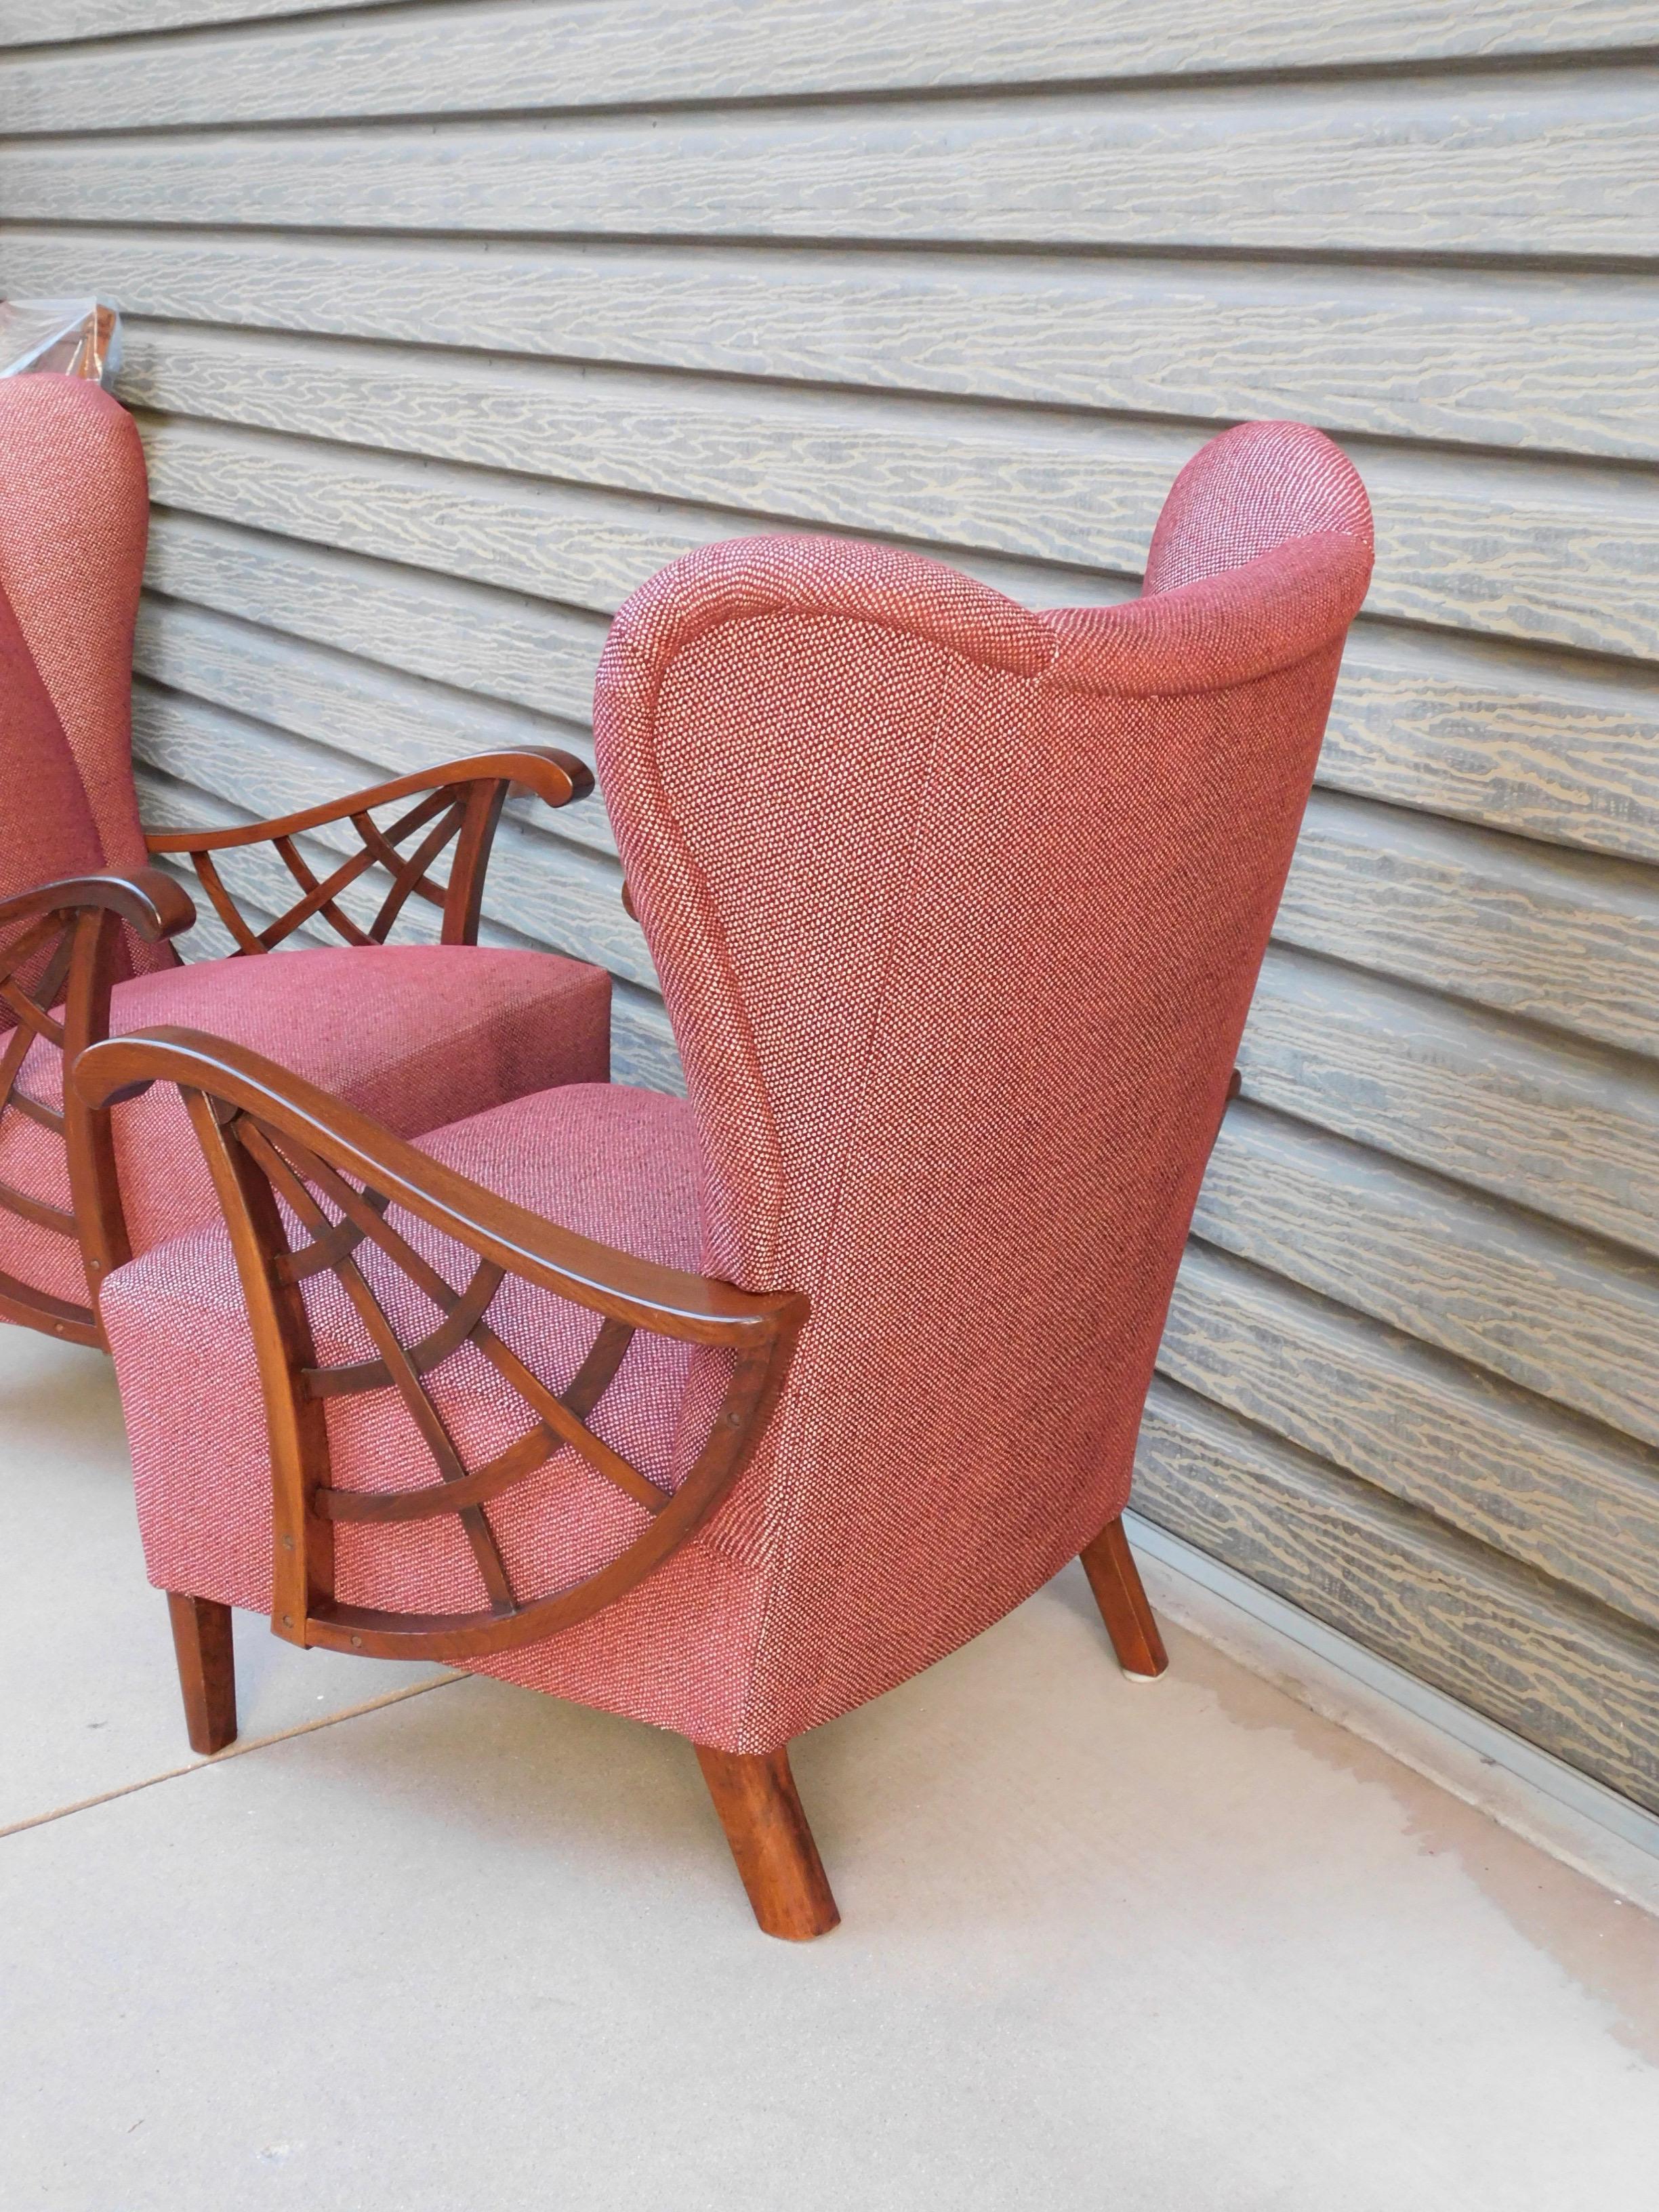 Pair of Swedish Modernist Winged Back Spider Web Armchairs, circa 1940 In Excellent Condition For Sale In Richmond, VA